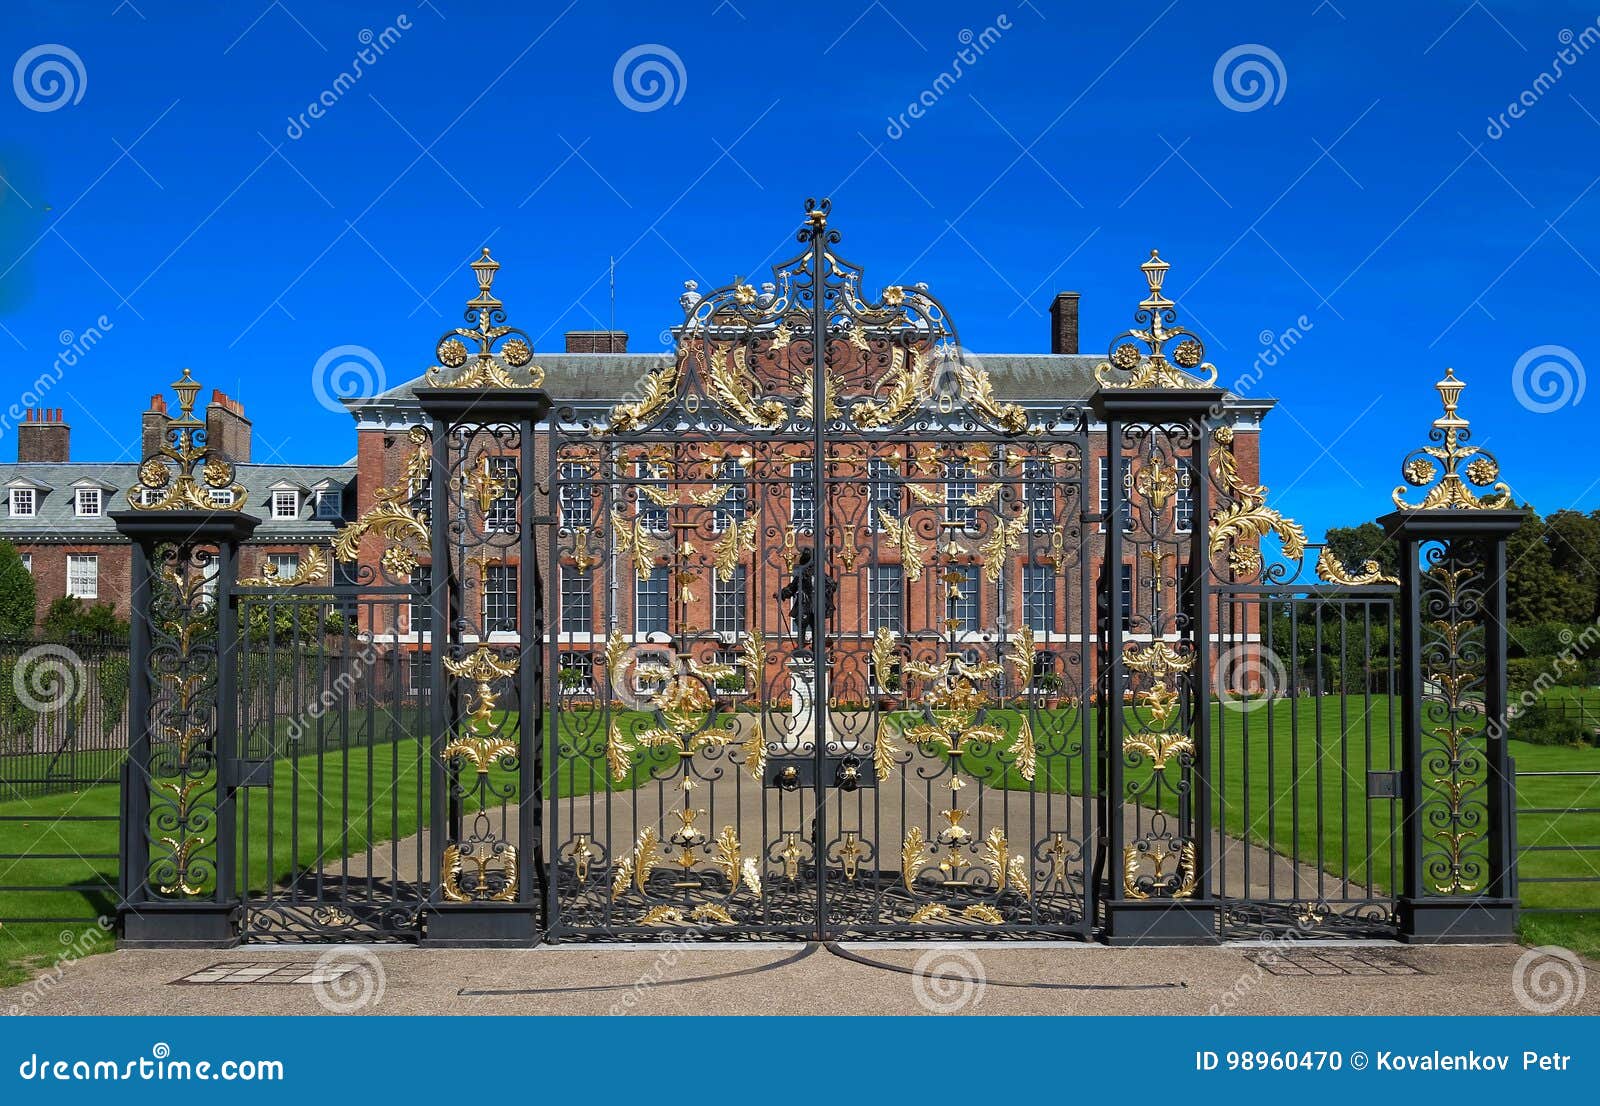 the gates of kensington palace in hyde park in london, england